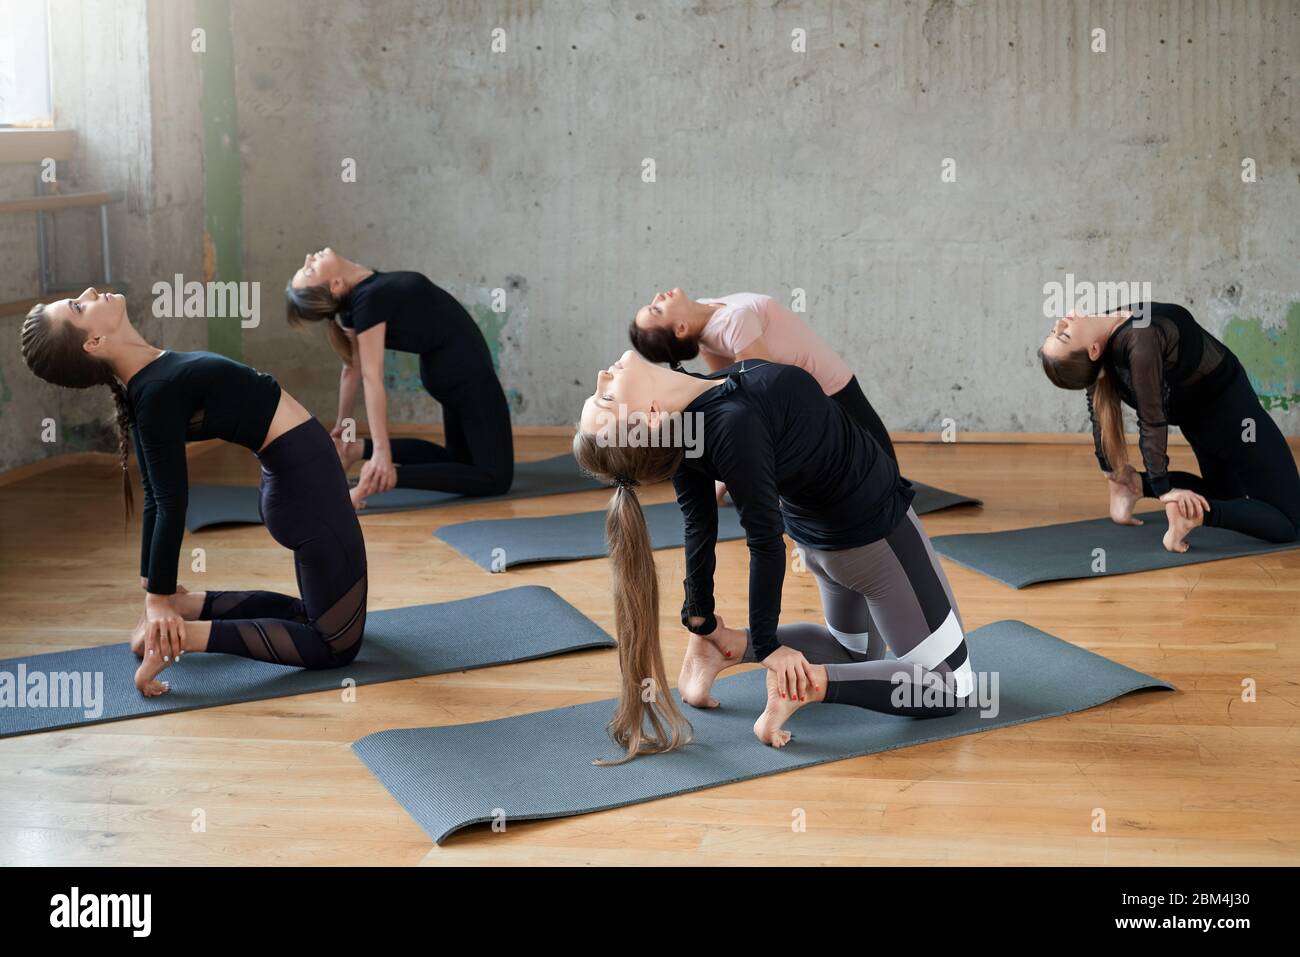 Side view of young fitnesswomen in sportswear practicing yoga pose, standing on knees and touching floor behind, practicing in studio, loft interior. Concept of healthy lifestyle, yoga. Stock Photo